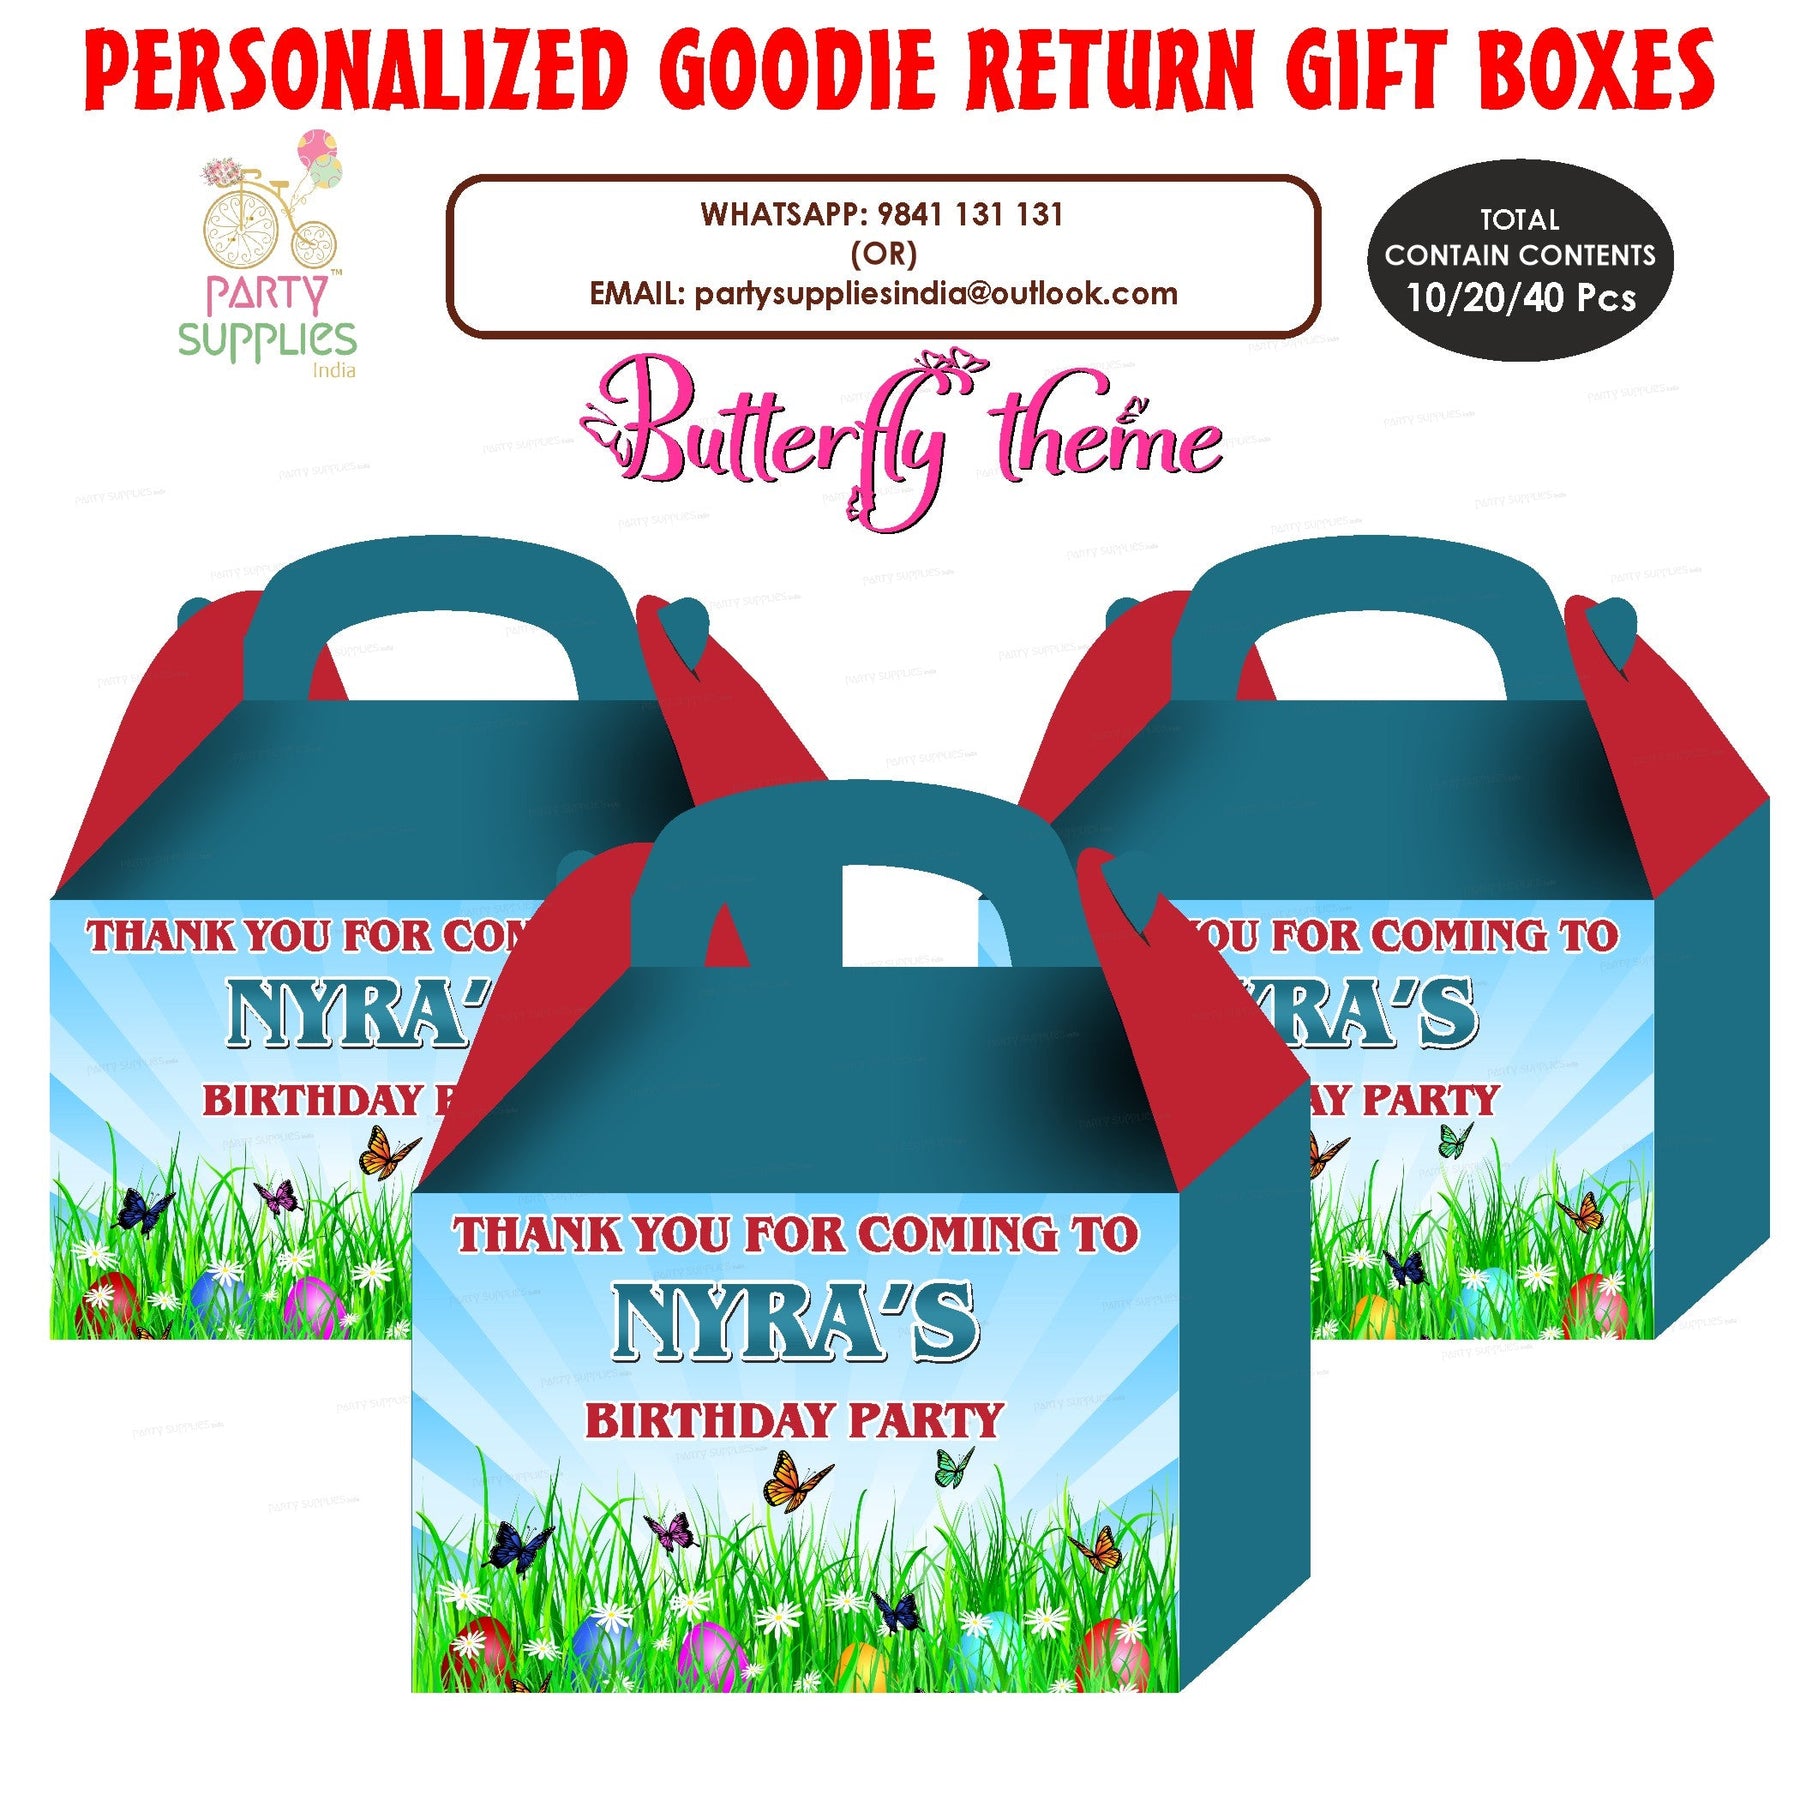 PSI Butterfly theme Goodie Return Gift Boxes